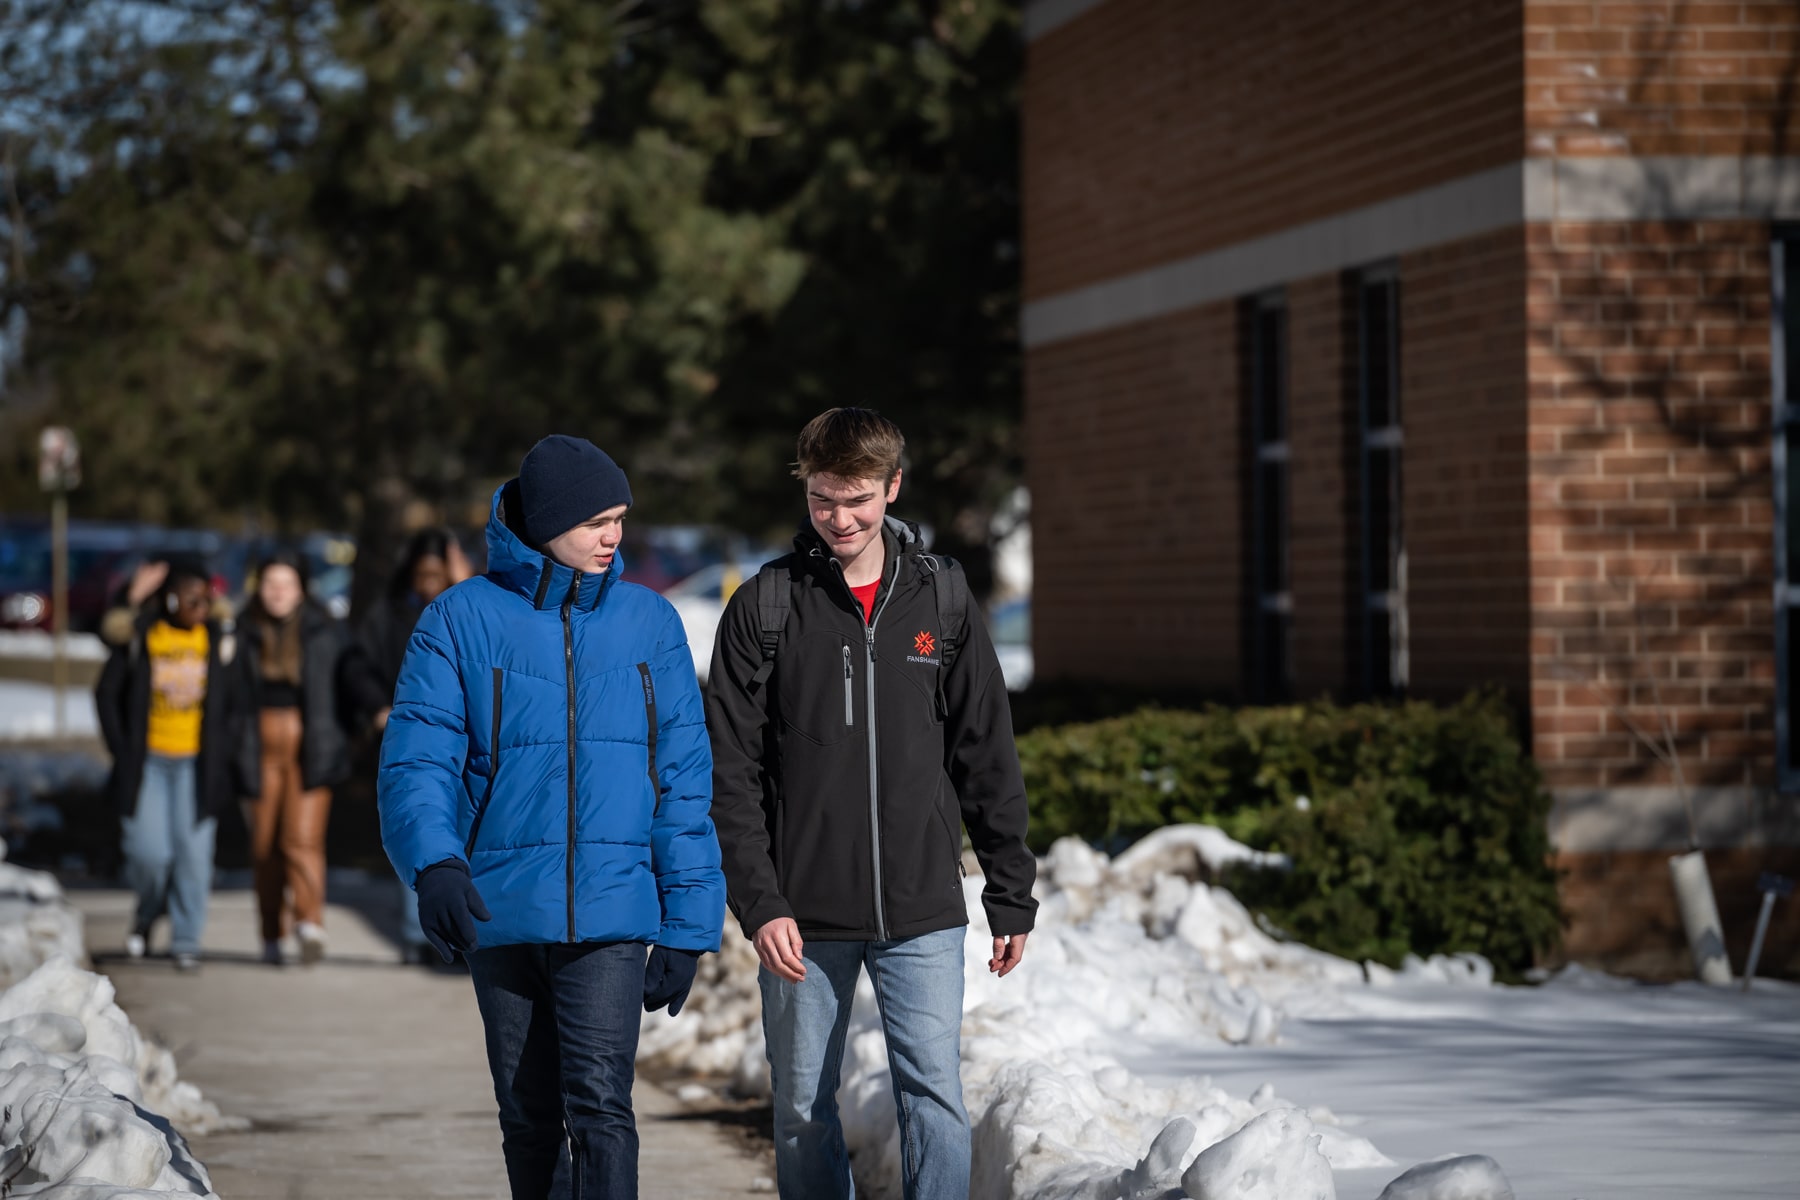 two students walking together in winter